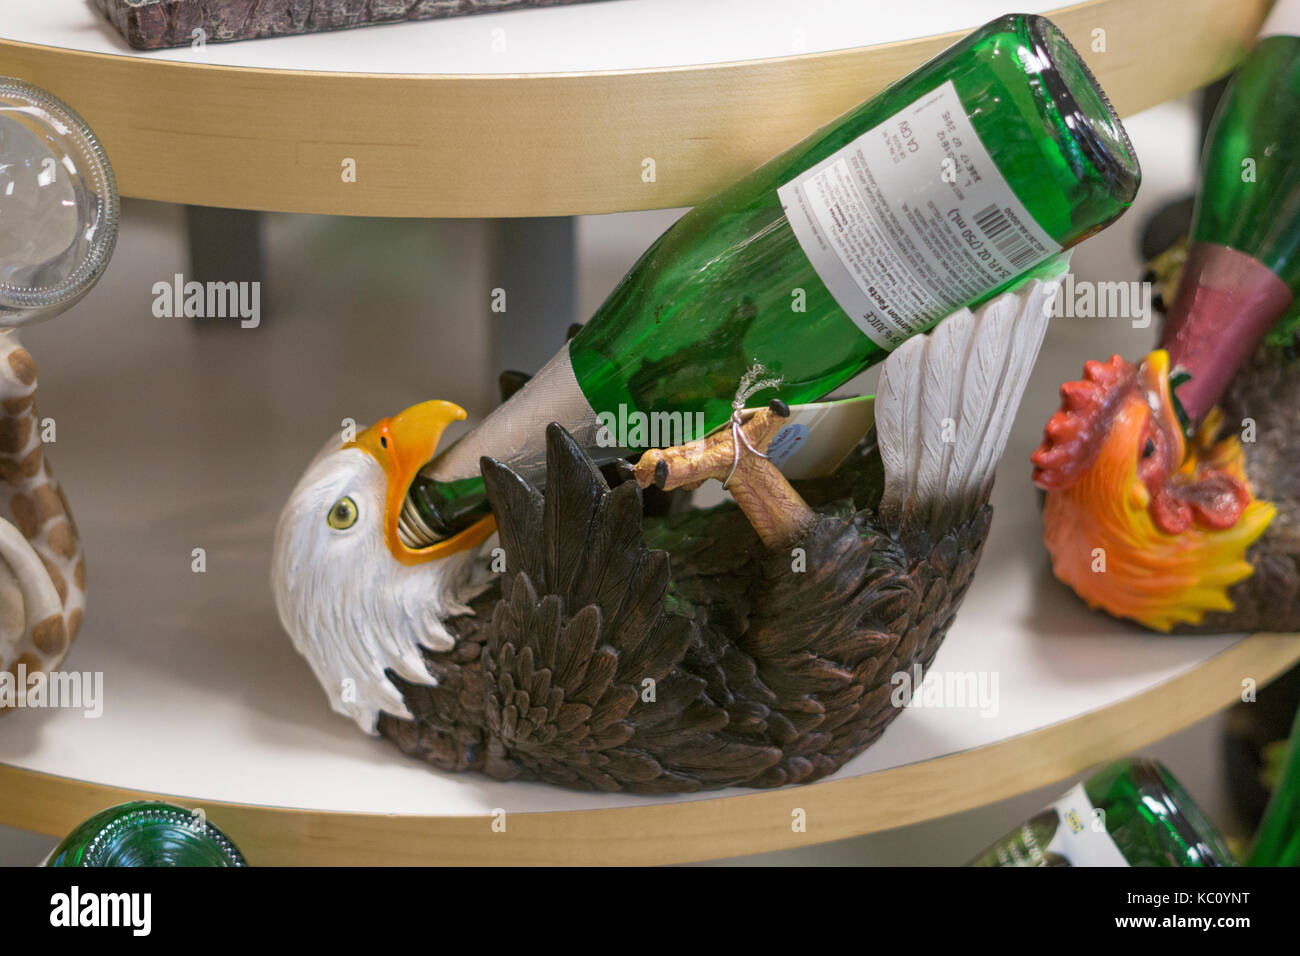 An eagle shaped wine bottle holder for sale at Gizmos & Gadgets at the Tanger Outlet Mall in Deer Park, Long Island, New York. Stock Photo